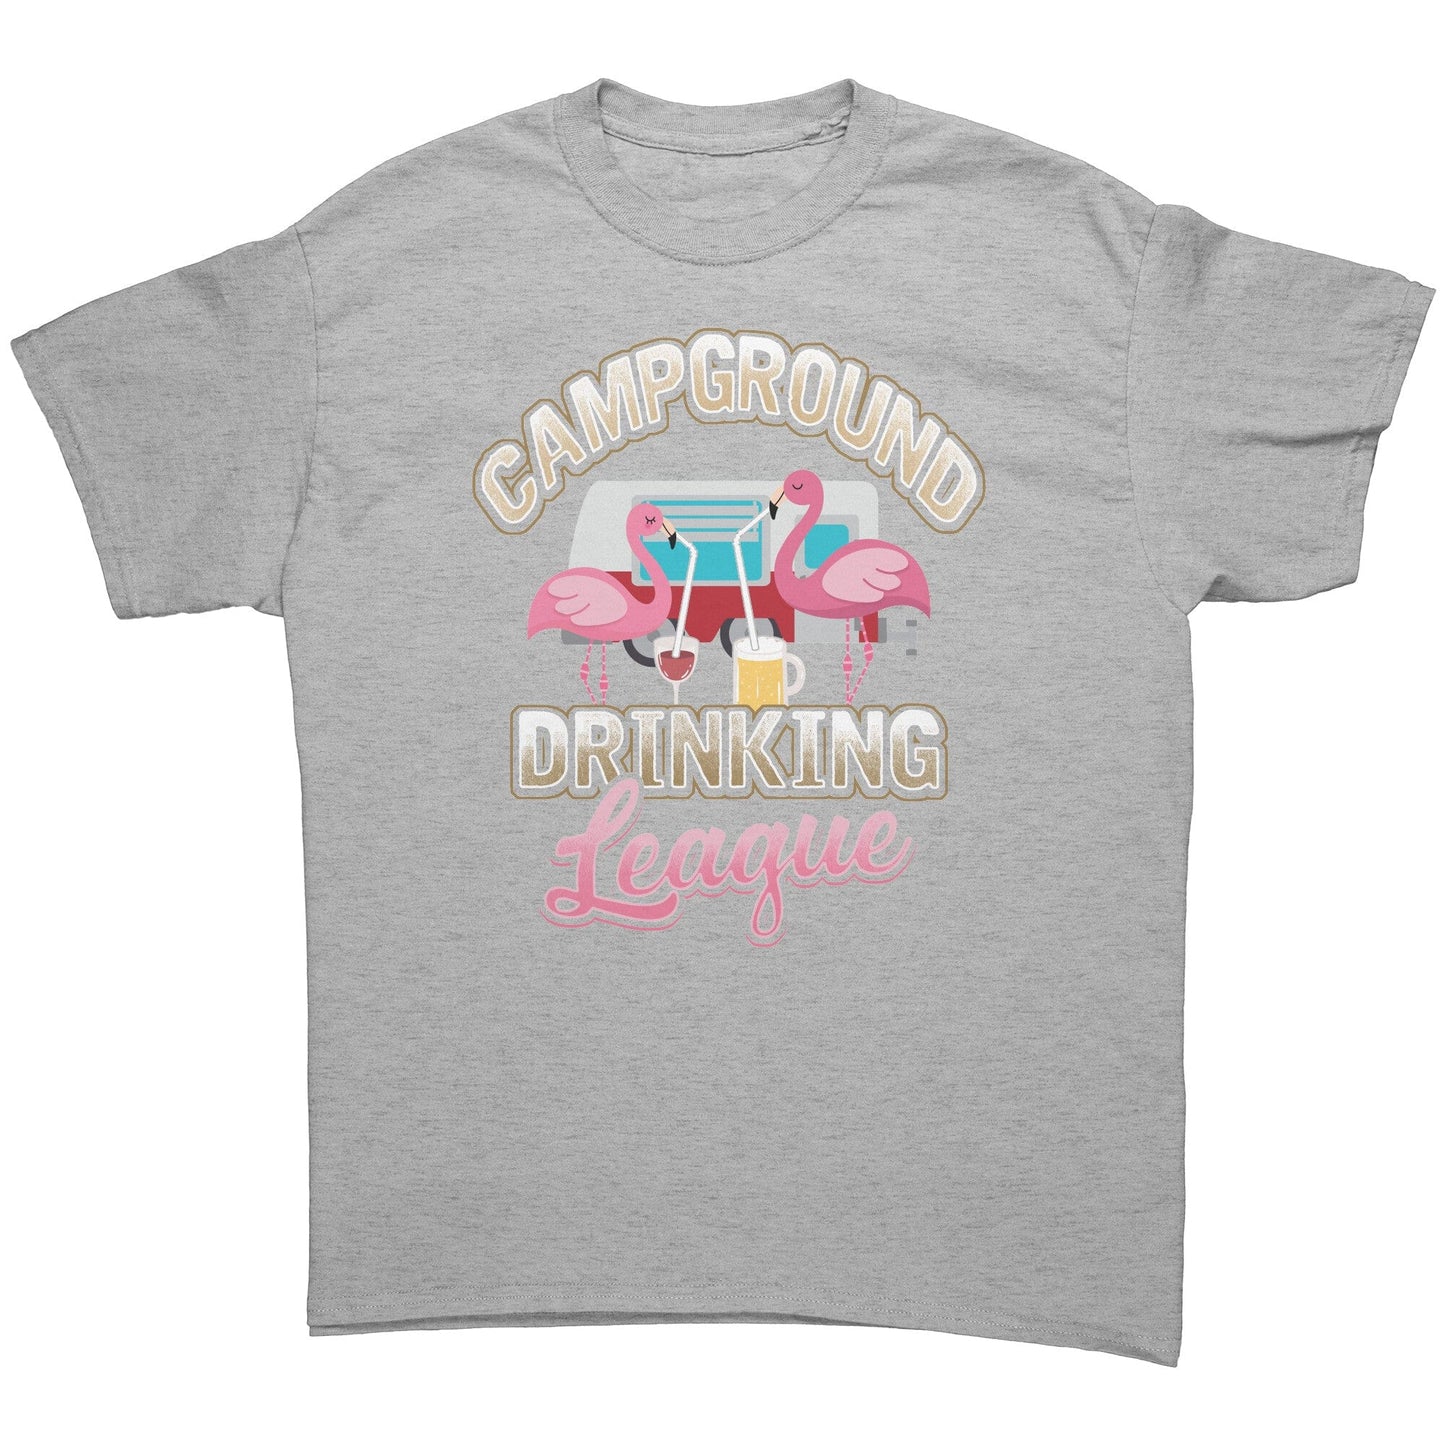 "Campground Drinking League" - Shirts